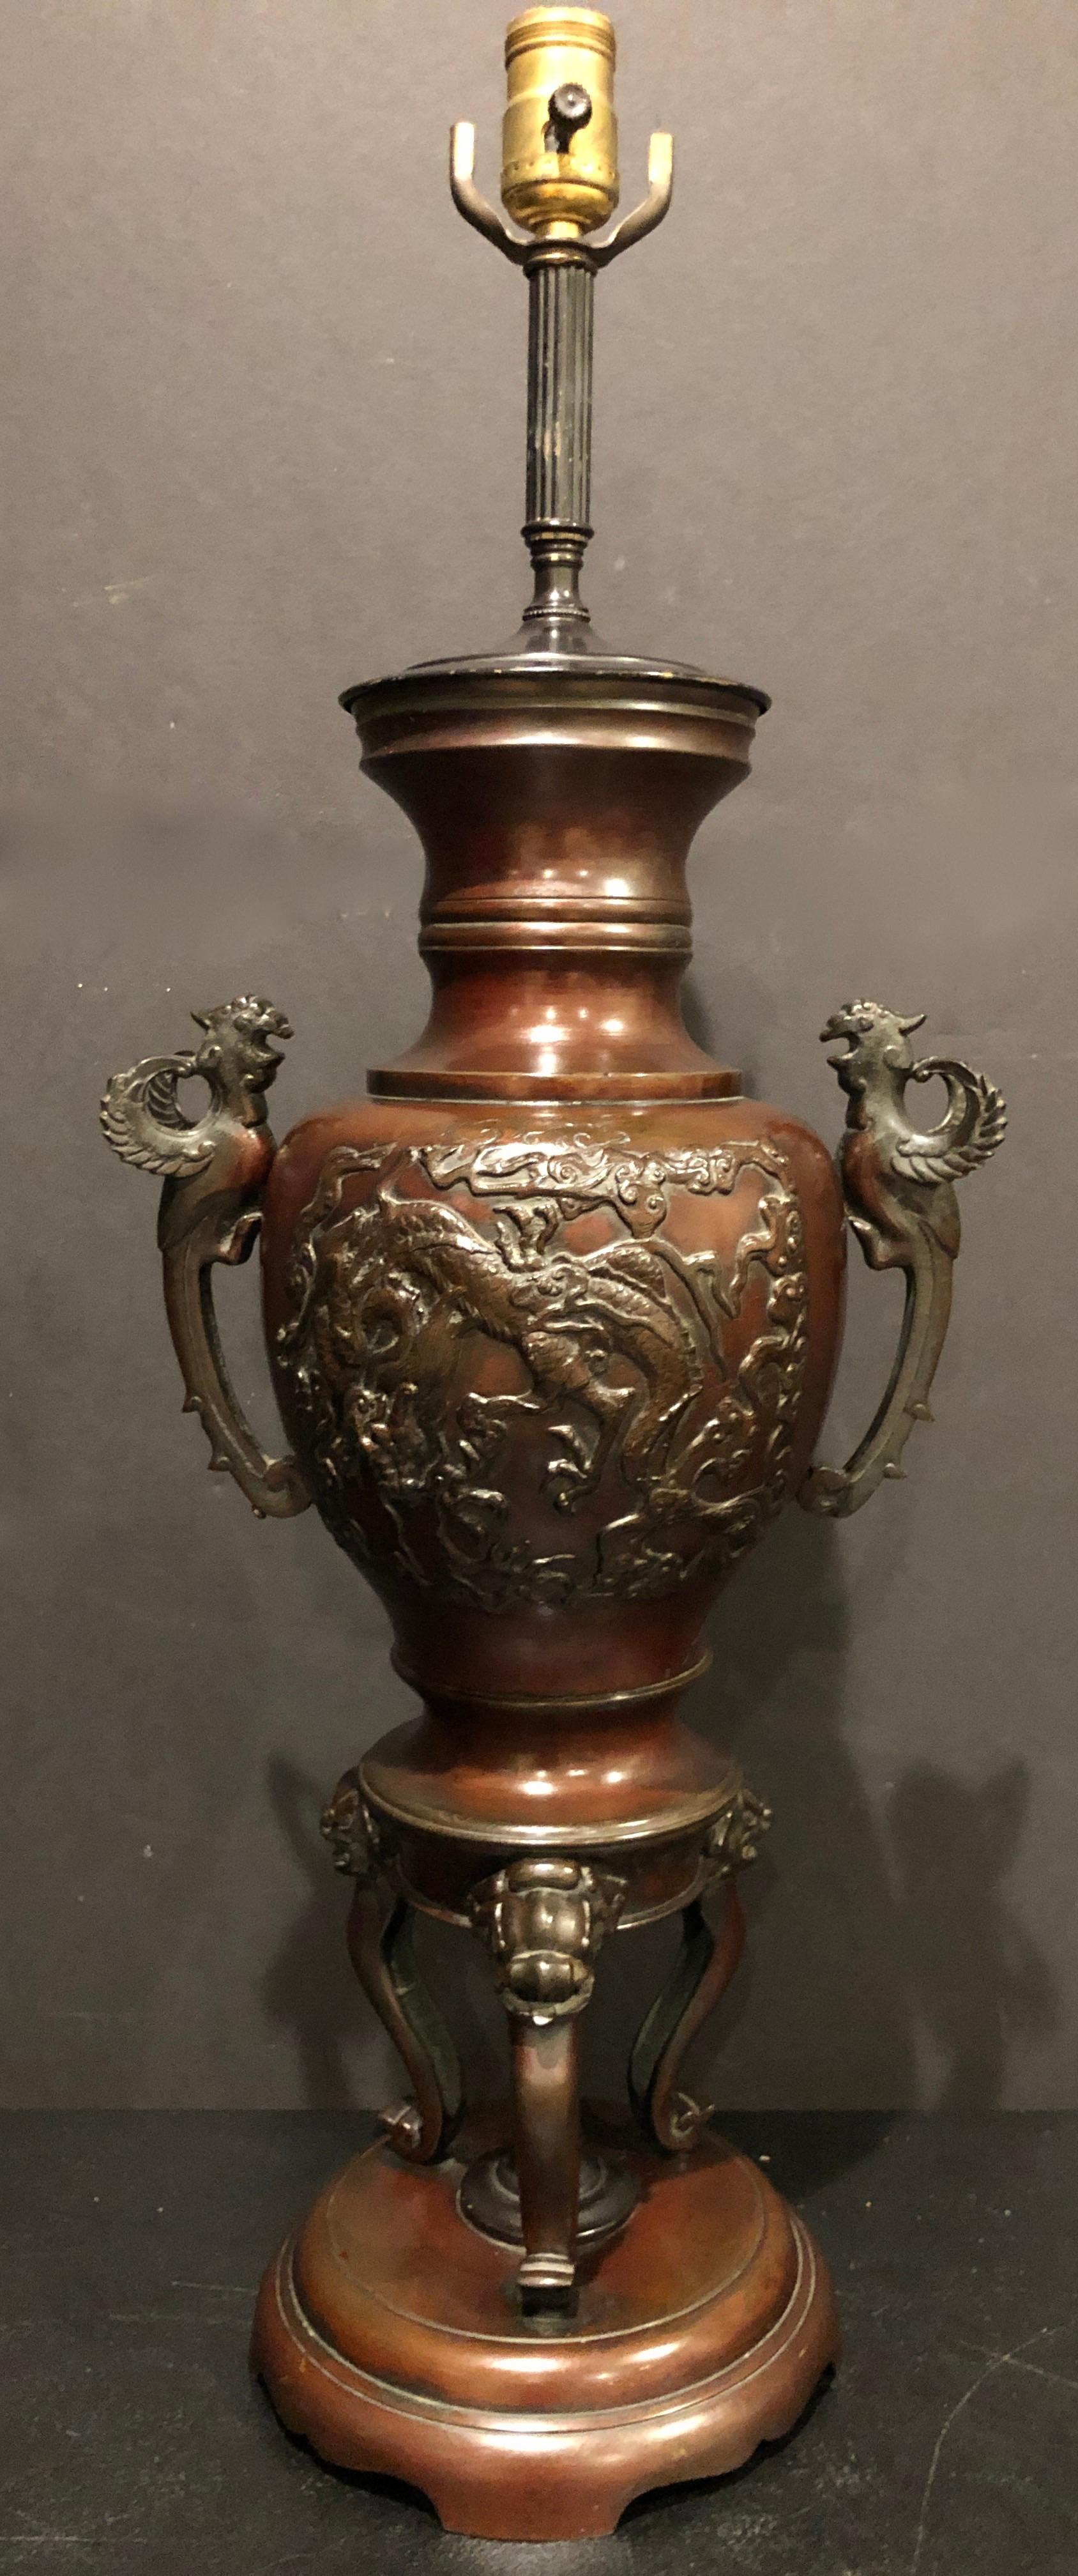 19th century Chinese bronze urn as lamp. Decorated with florals and dragon in high relief. Surmounted by two handles depicting phoenix birds.
Measures: 22